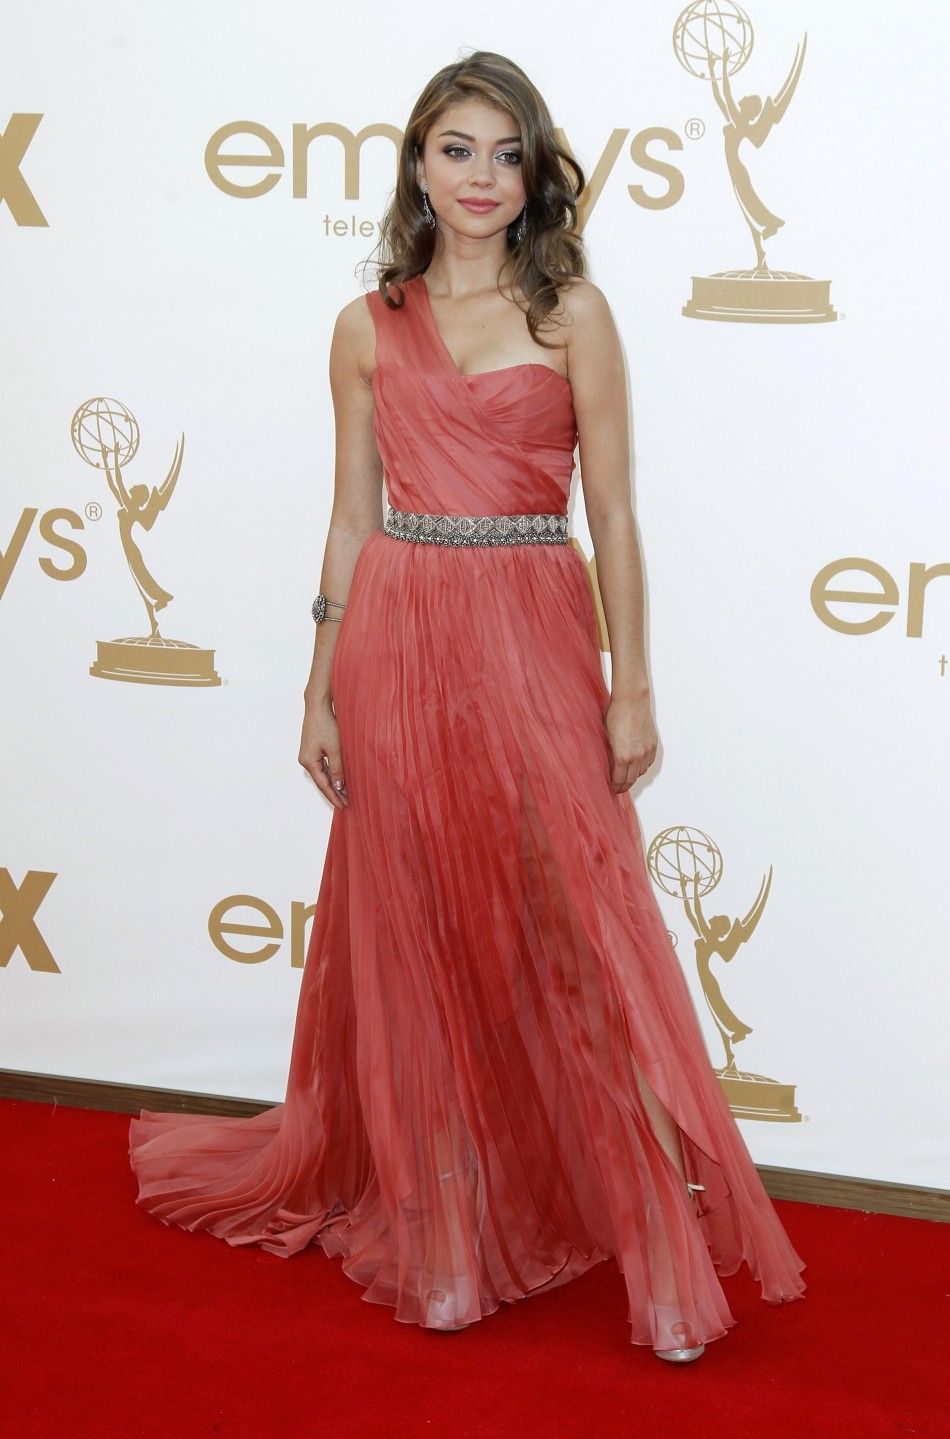 Actress Sarah Hyland from quotModern Familyquot poses as she arrives at the 63rd Primetime Emmy Awards in Los Angeles September 18, 2011. 